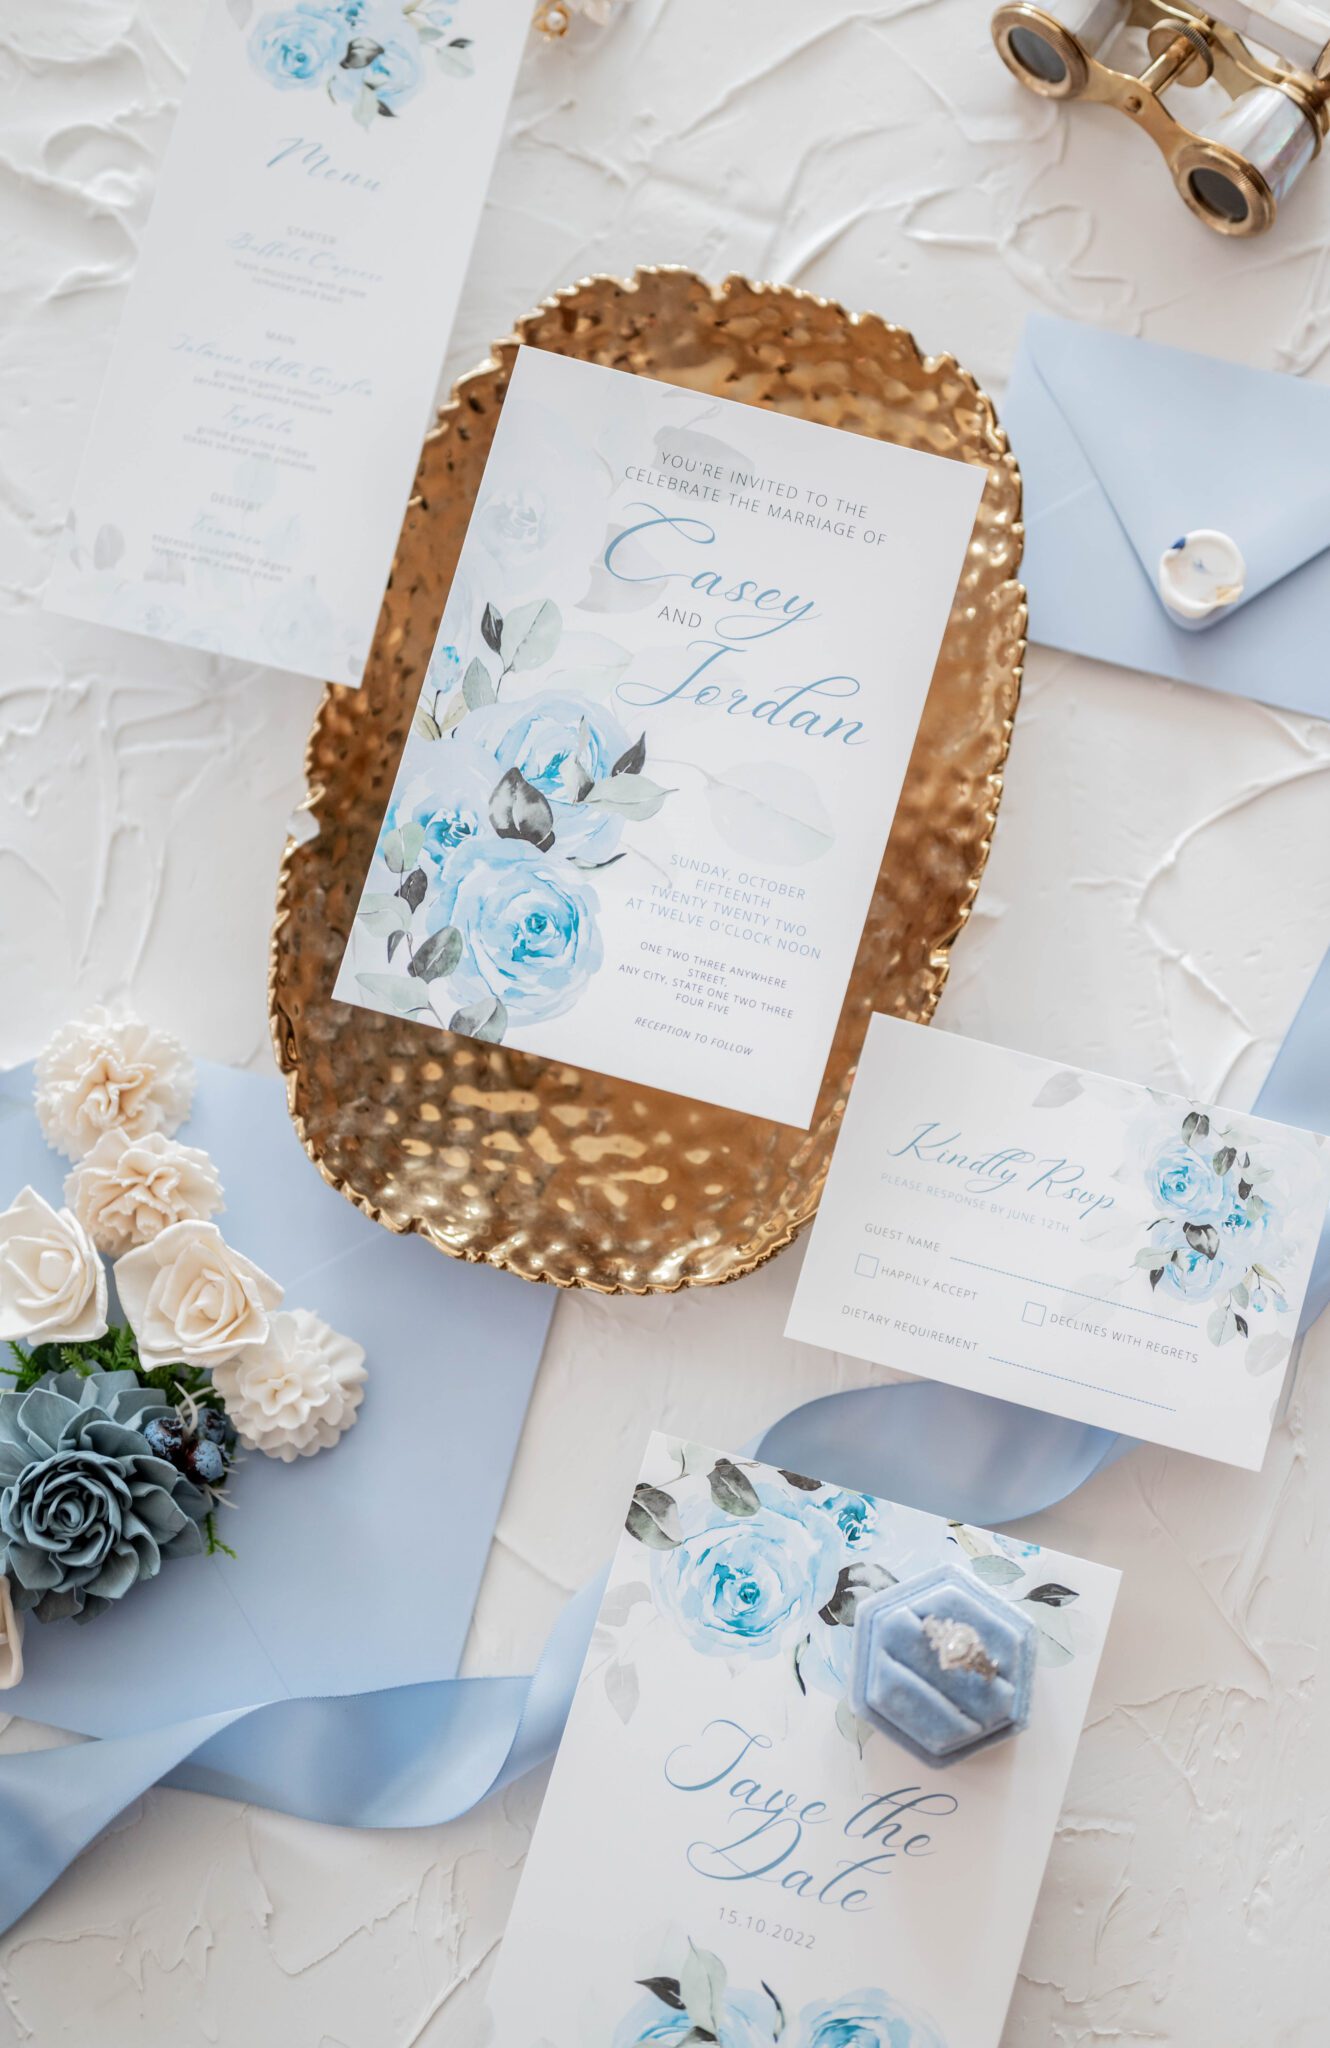 Flat-lay photo featuring french-inspired custom invitations, save-the-dates, RSVP card and menu by Red Fox Multimedia, white and blue floral accents on top of baby blue envelopes with white wax seal, romantic stationery ideas in blue